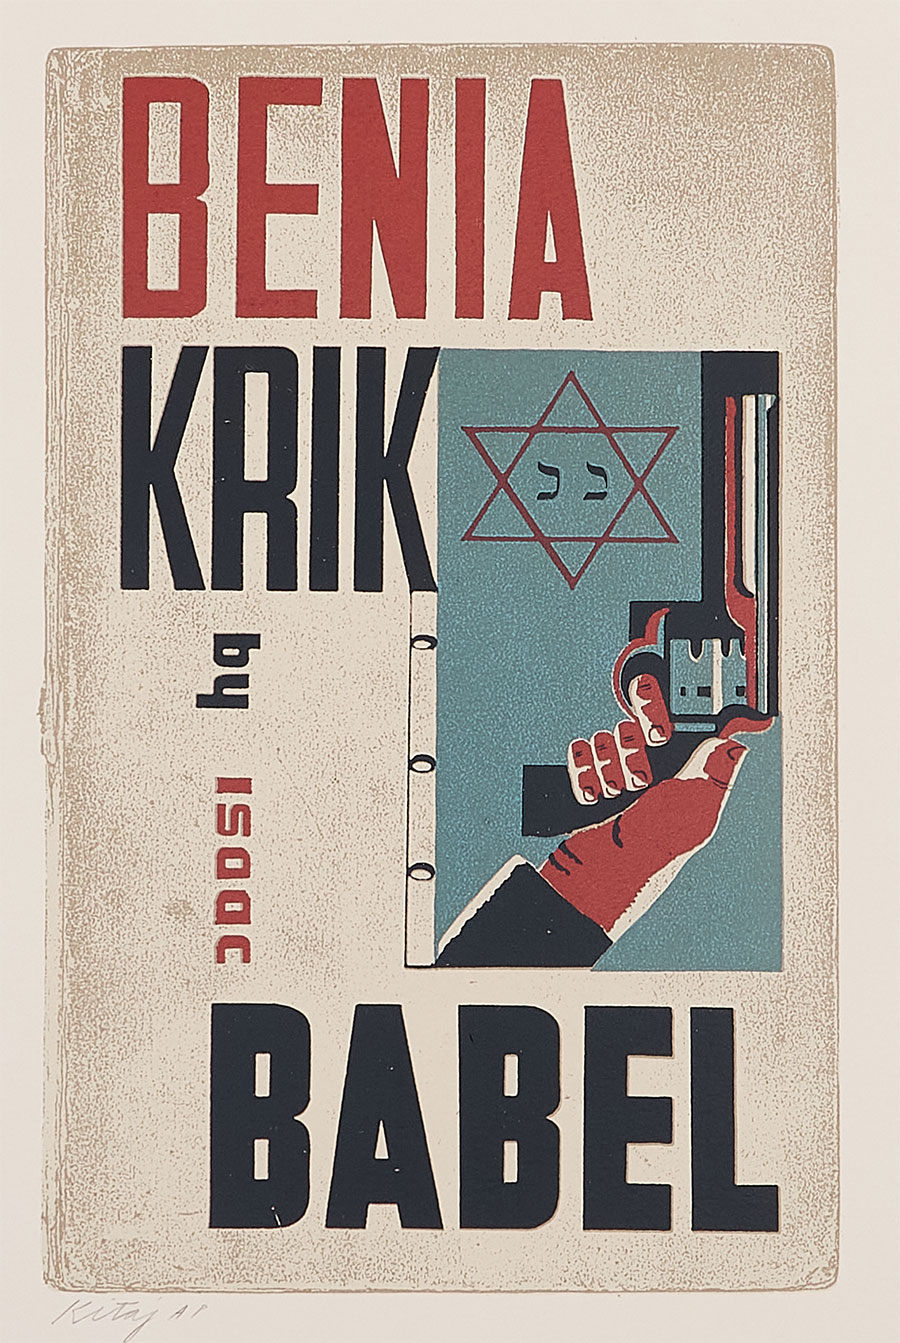 Book cover of red and black text and an image of a hand holding a gun next to a Jewish star of David.